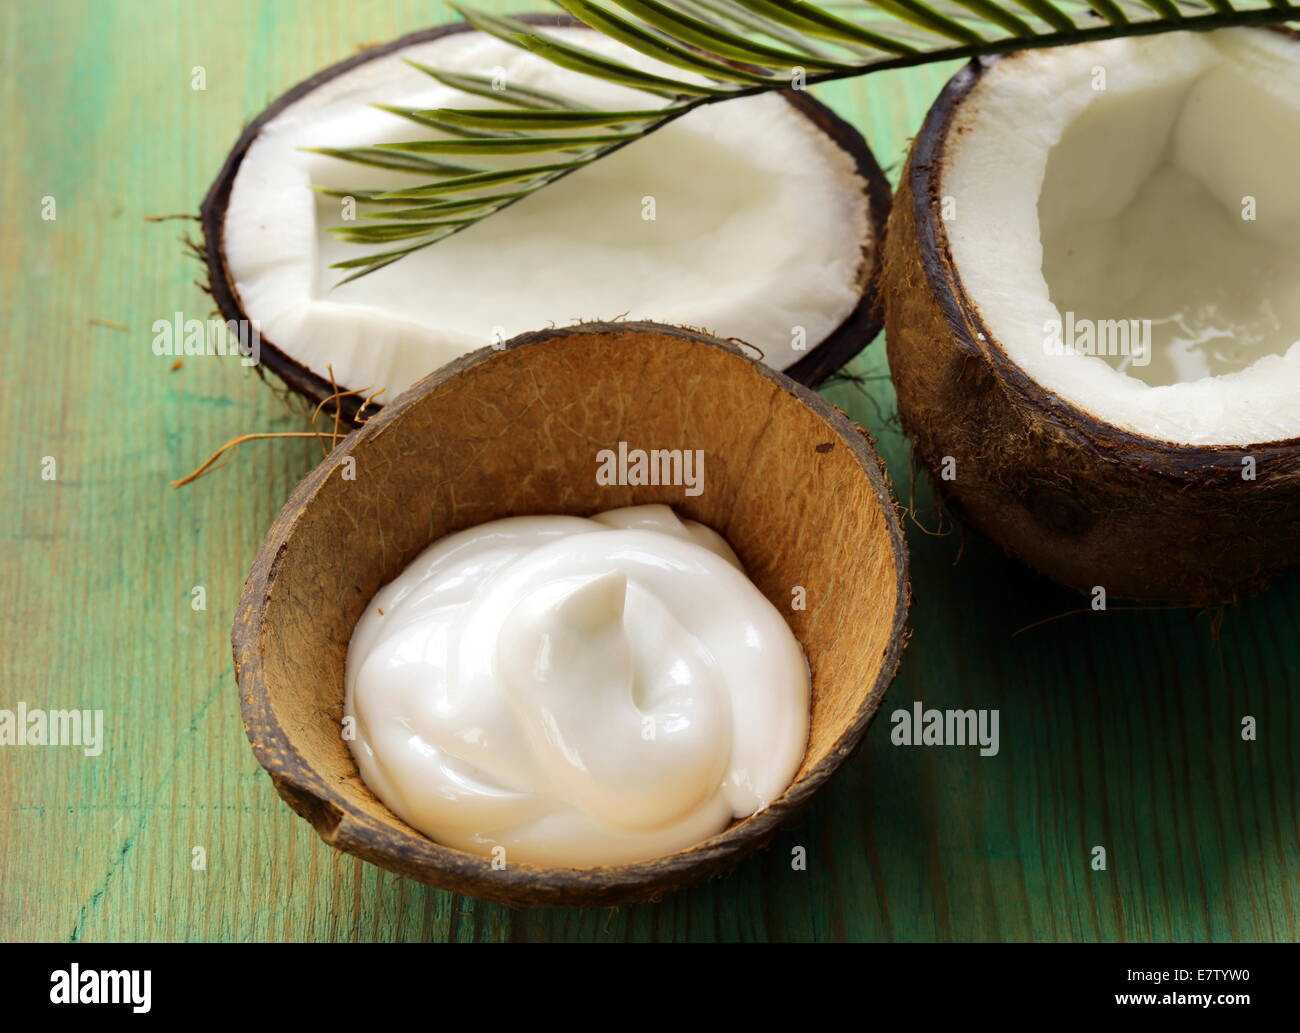 moisturizer natural coconut cream for face and body Stock Photo